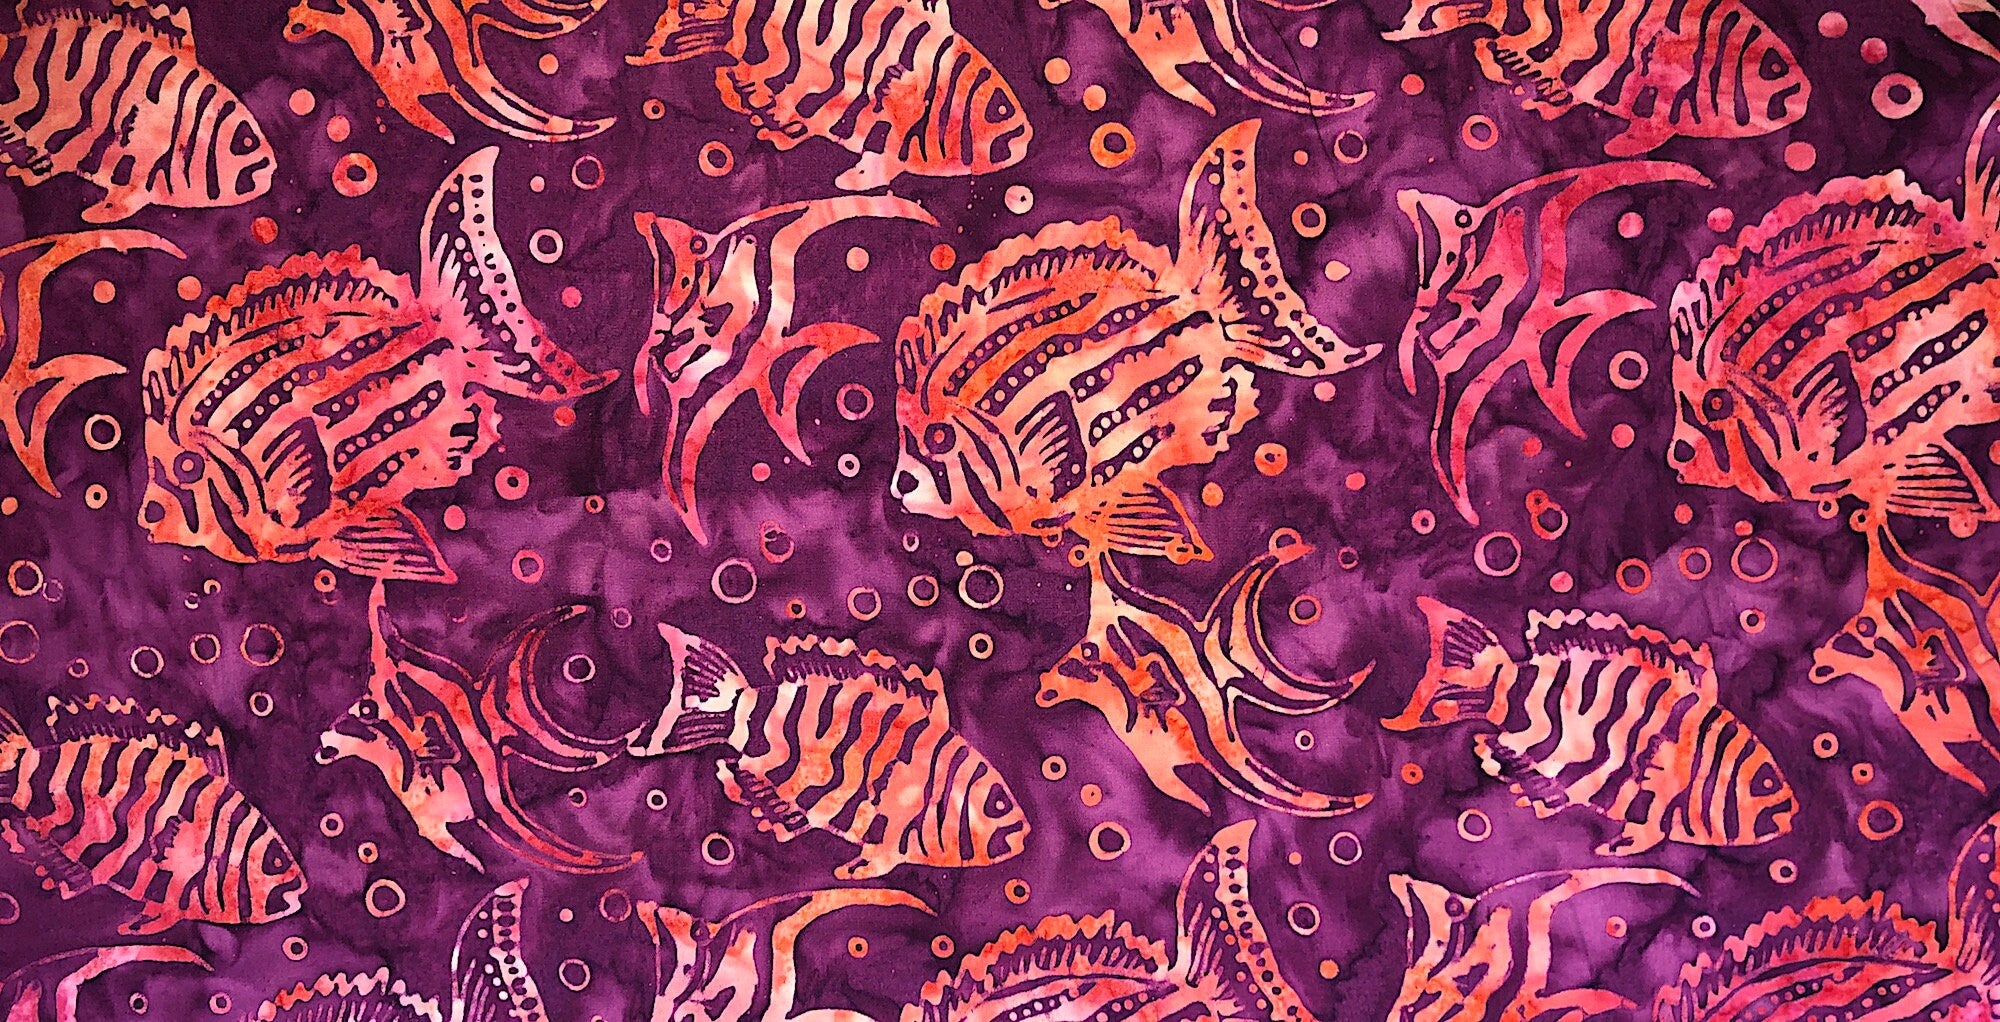 This fabric is called Batik Down under and has shades of red and orange fish on a background that has shades of burgundy/reds.